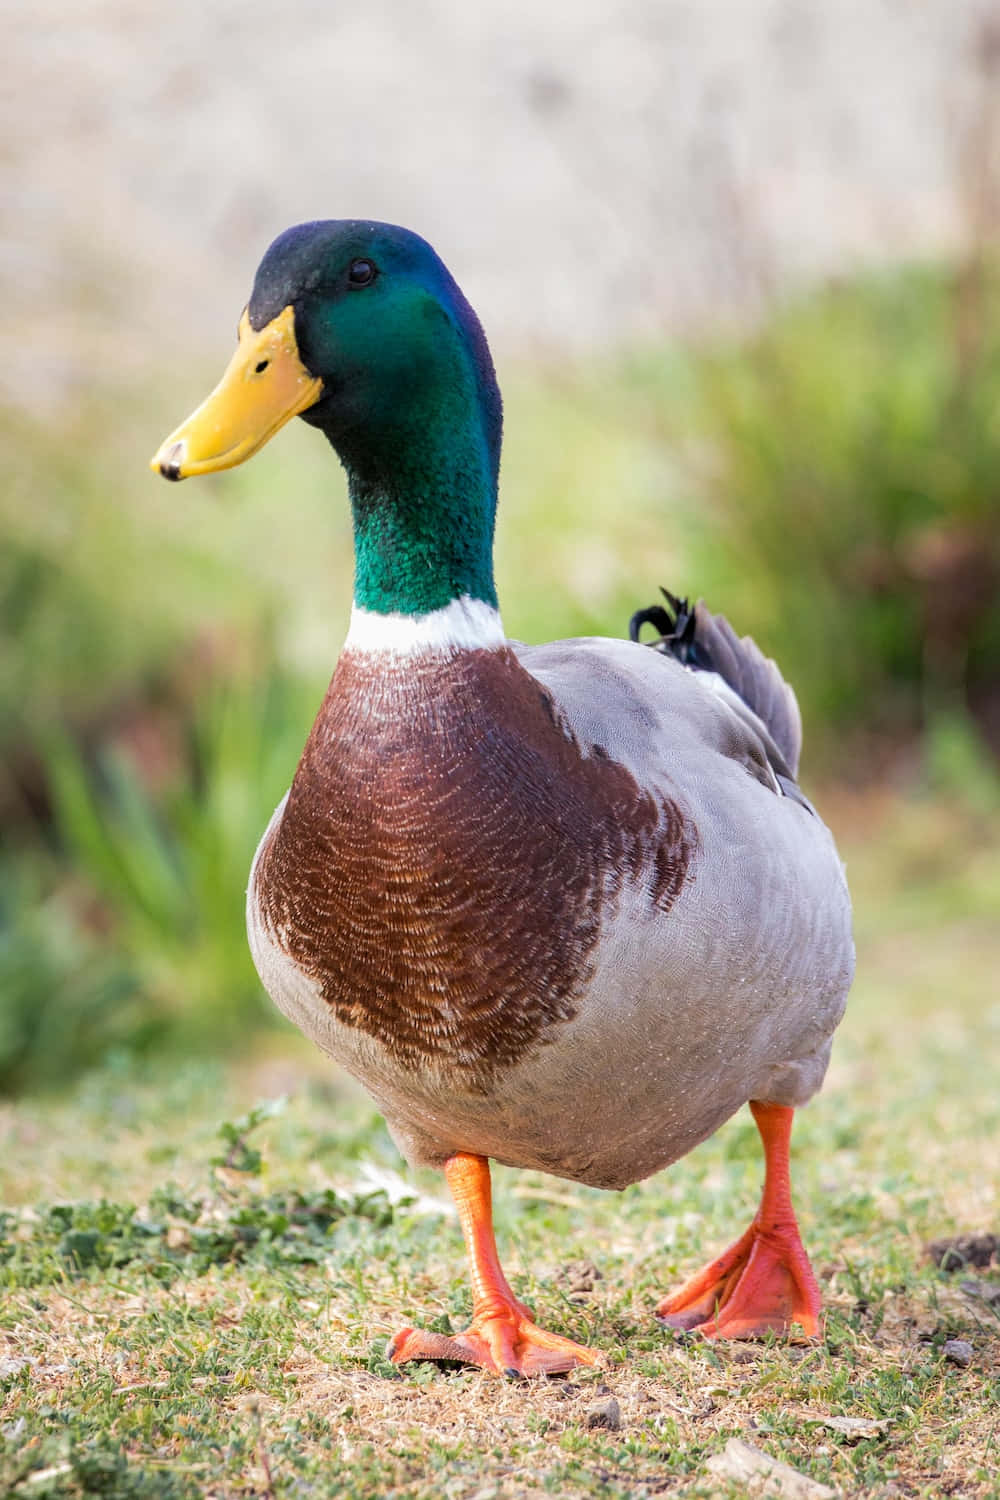 A cheerful duck in a pond